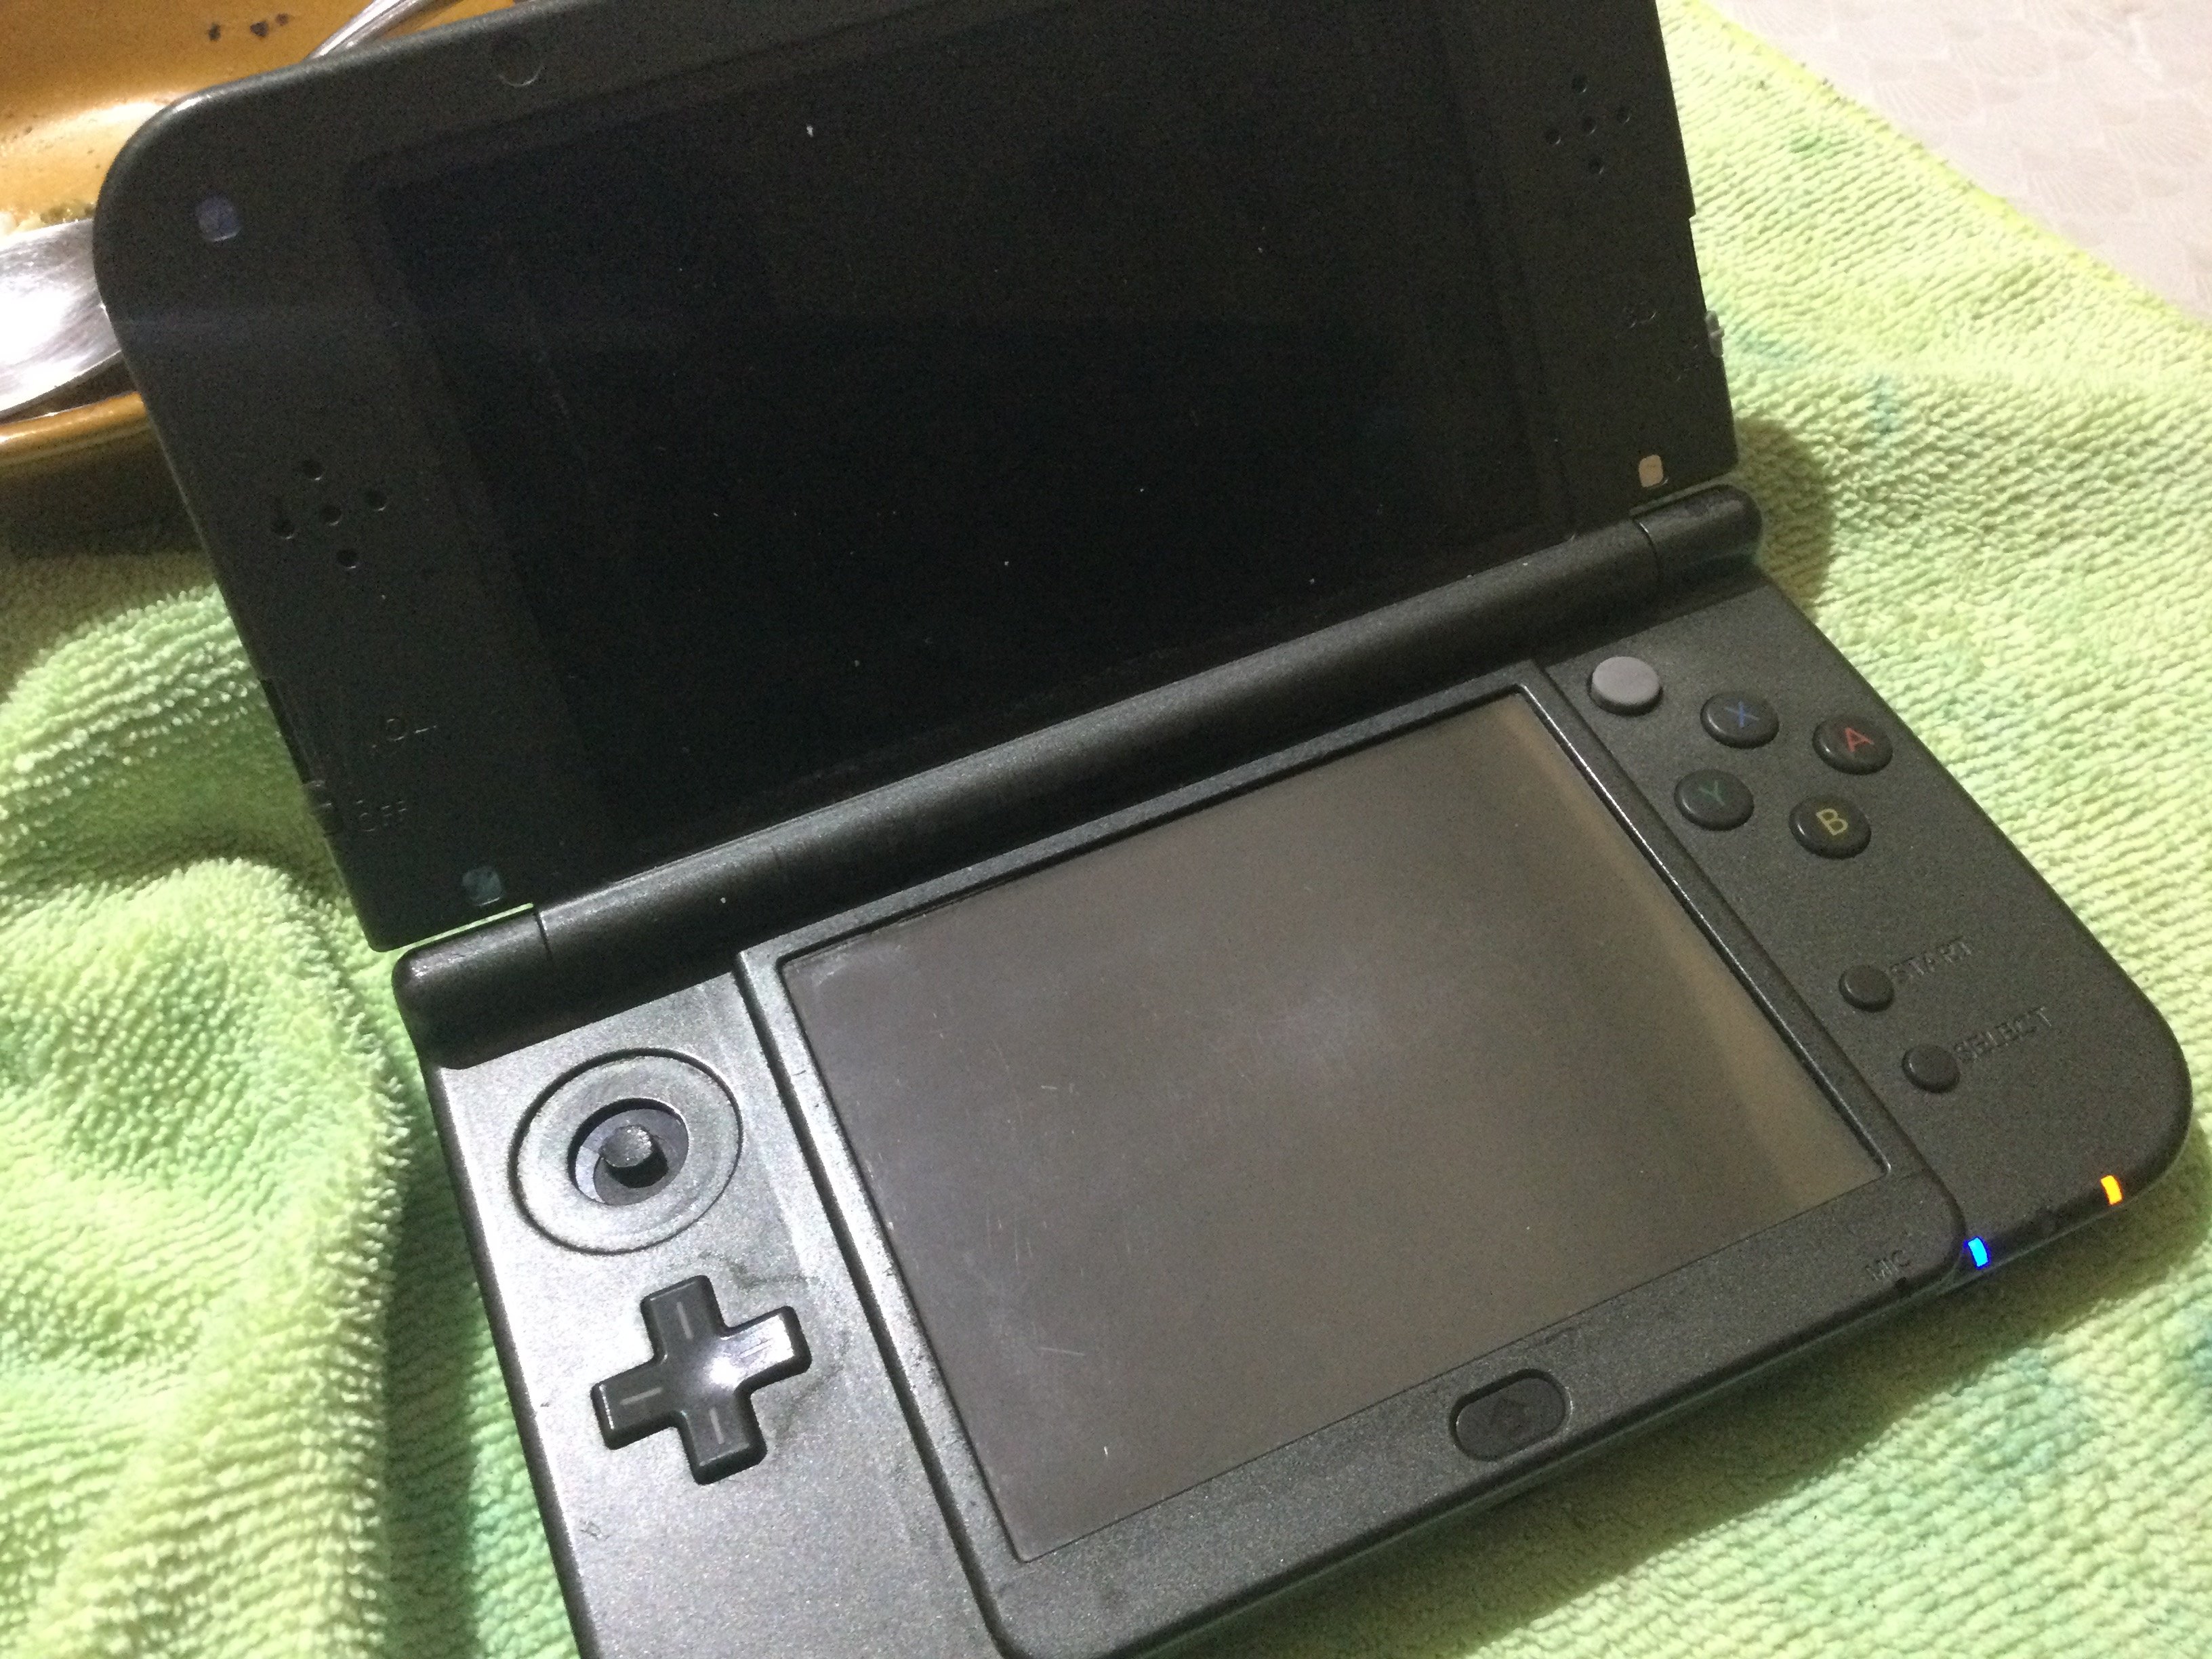 Help] I've got a New 3DS XL that refuses to boot